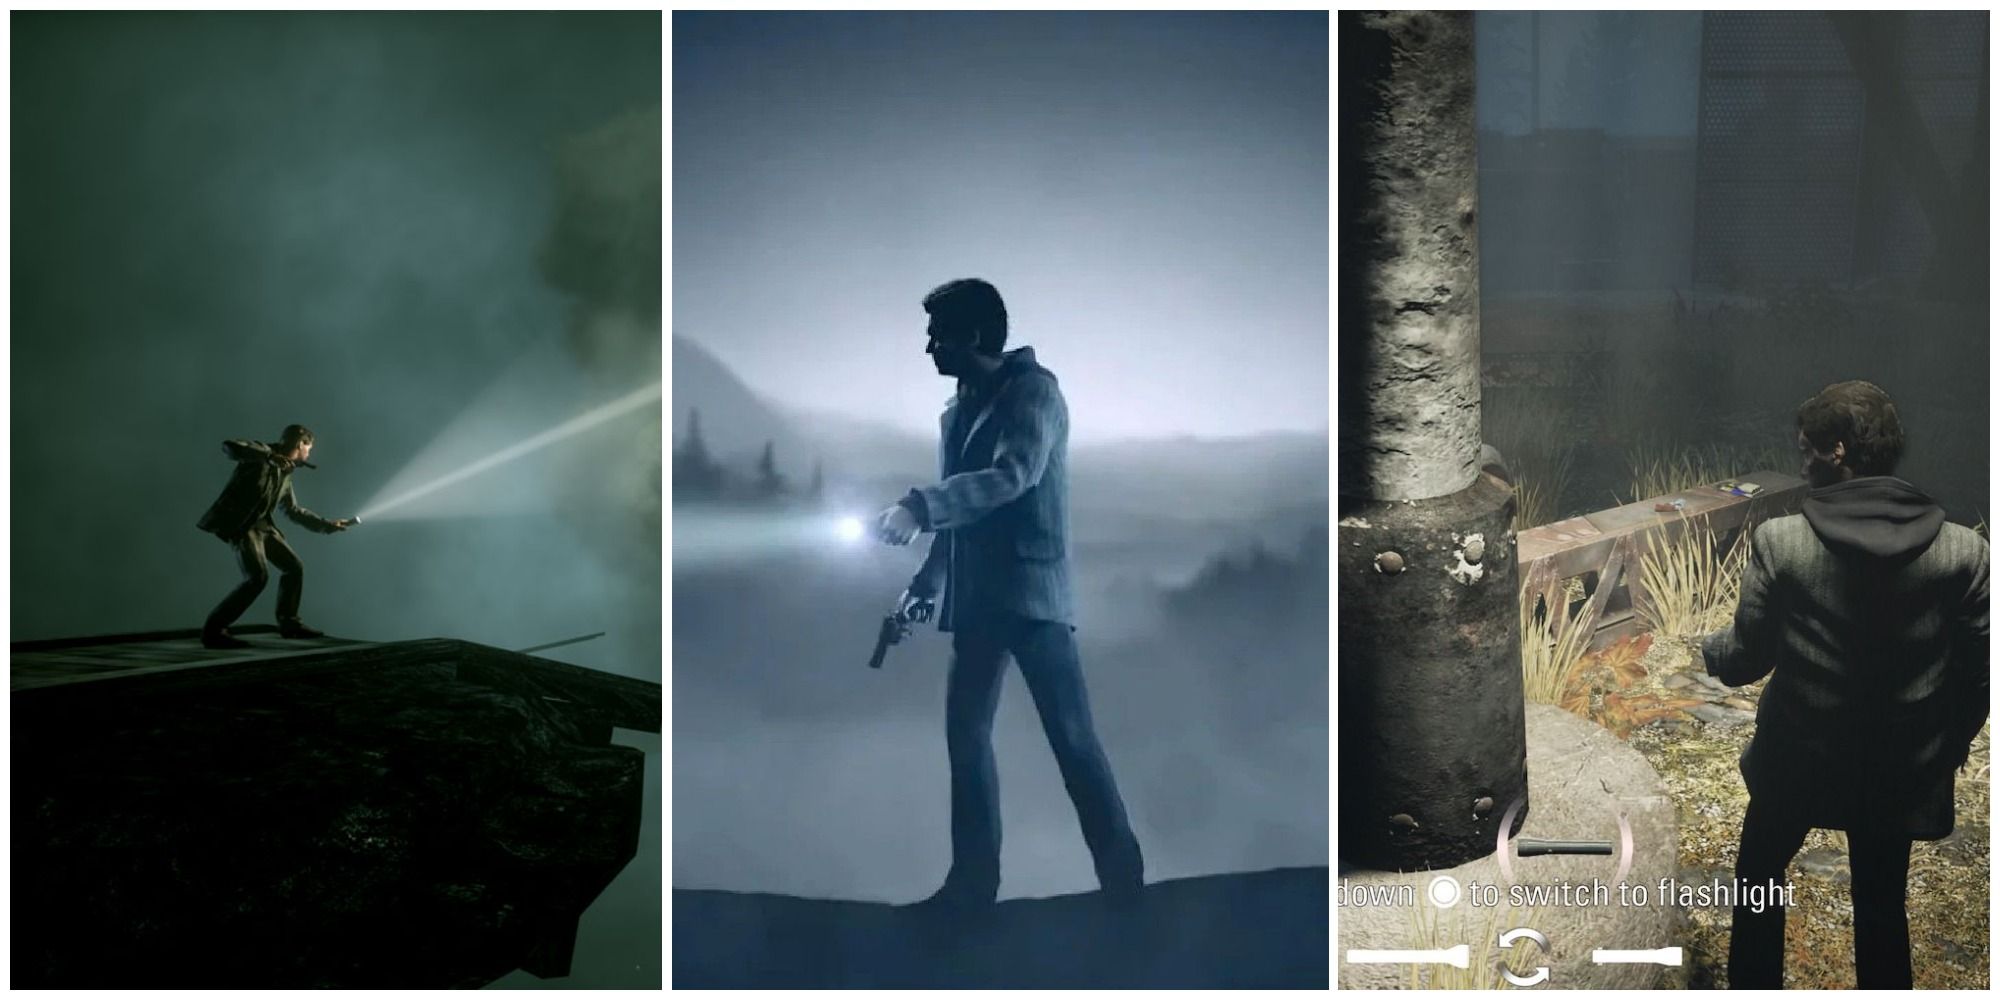 New Secrets In 'Alan Wake Remastered' Have Set My Fan-Theory Brain